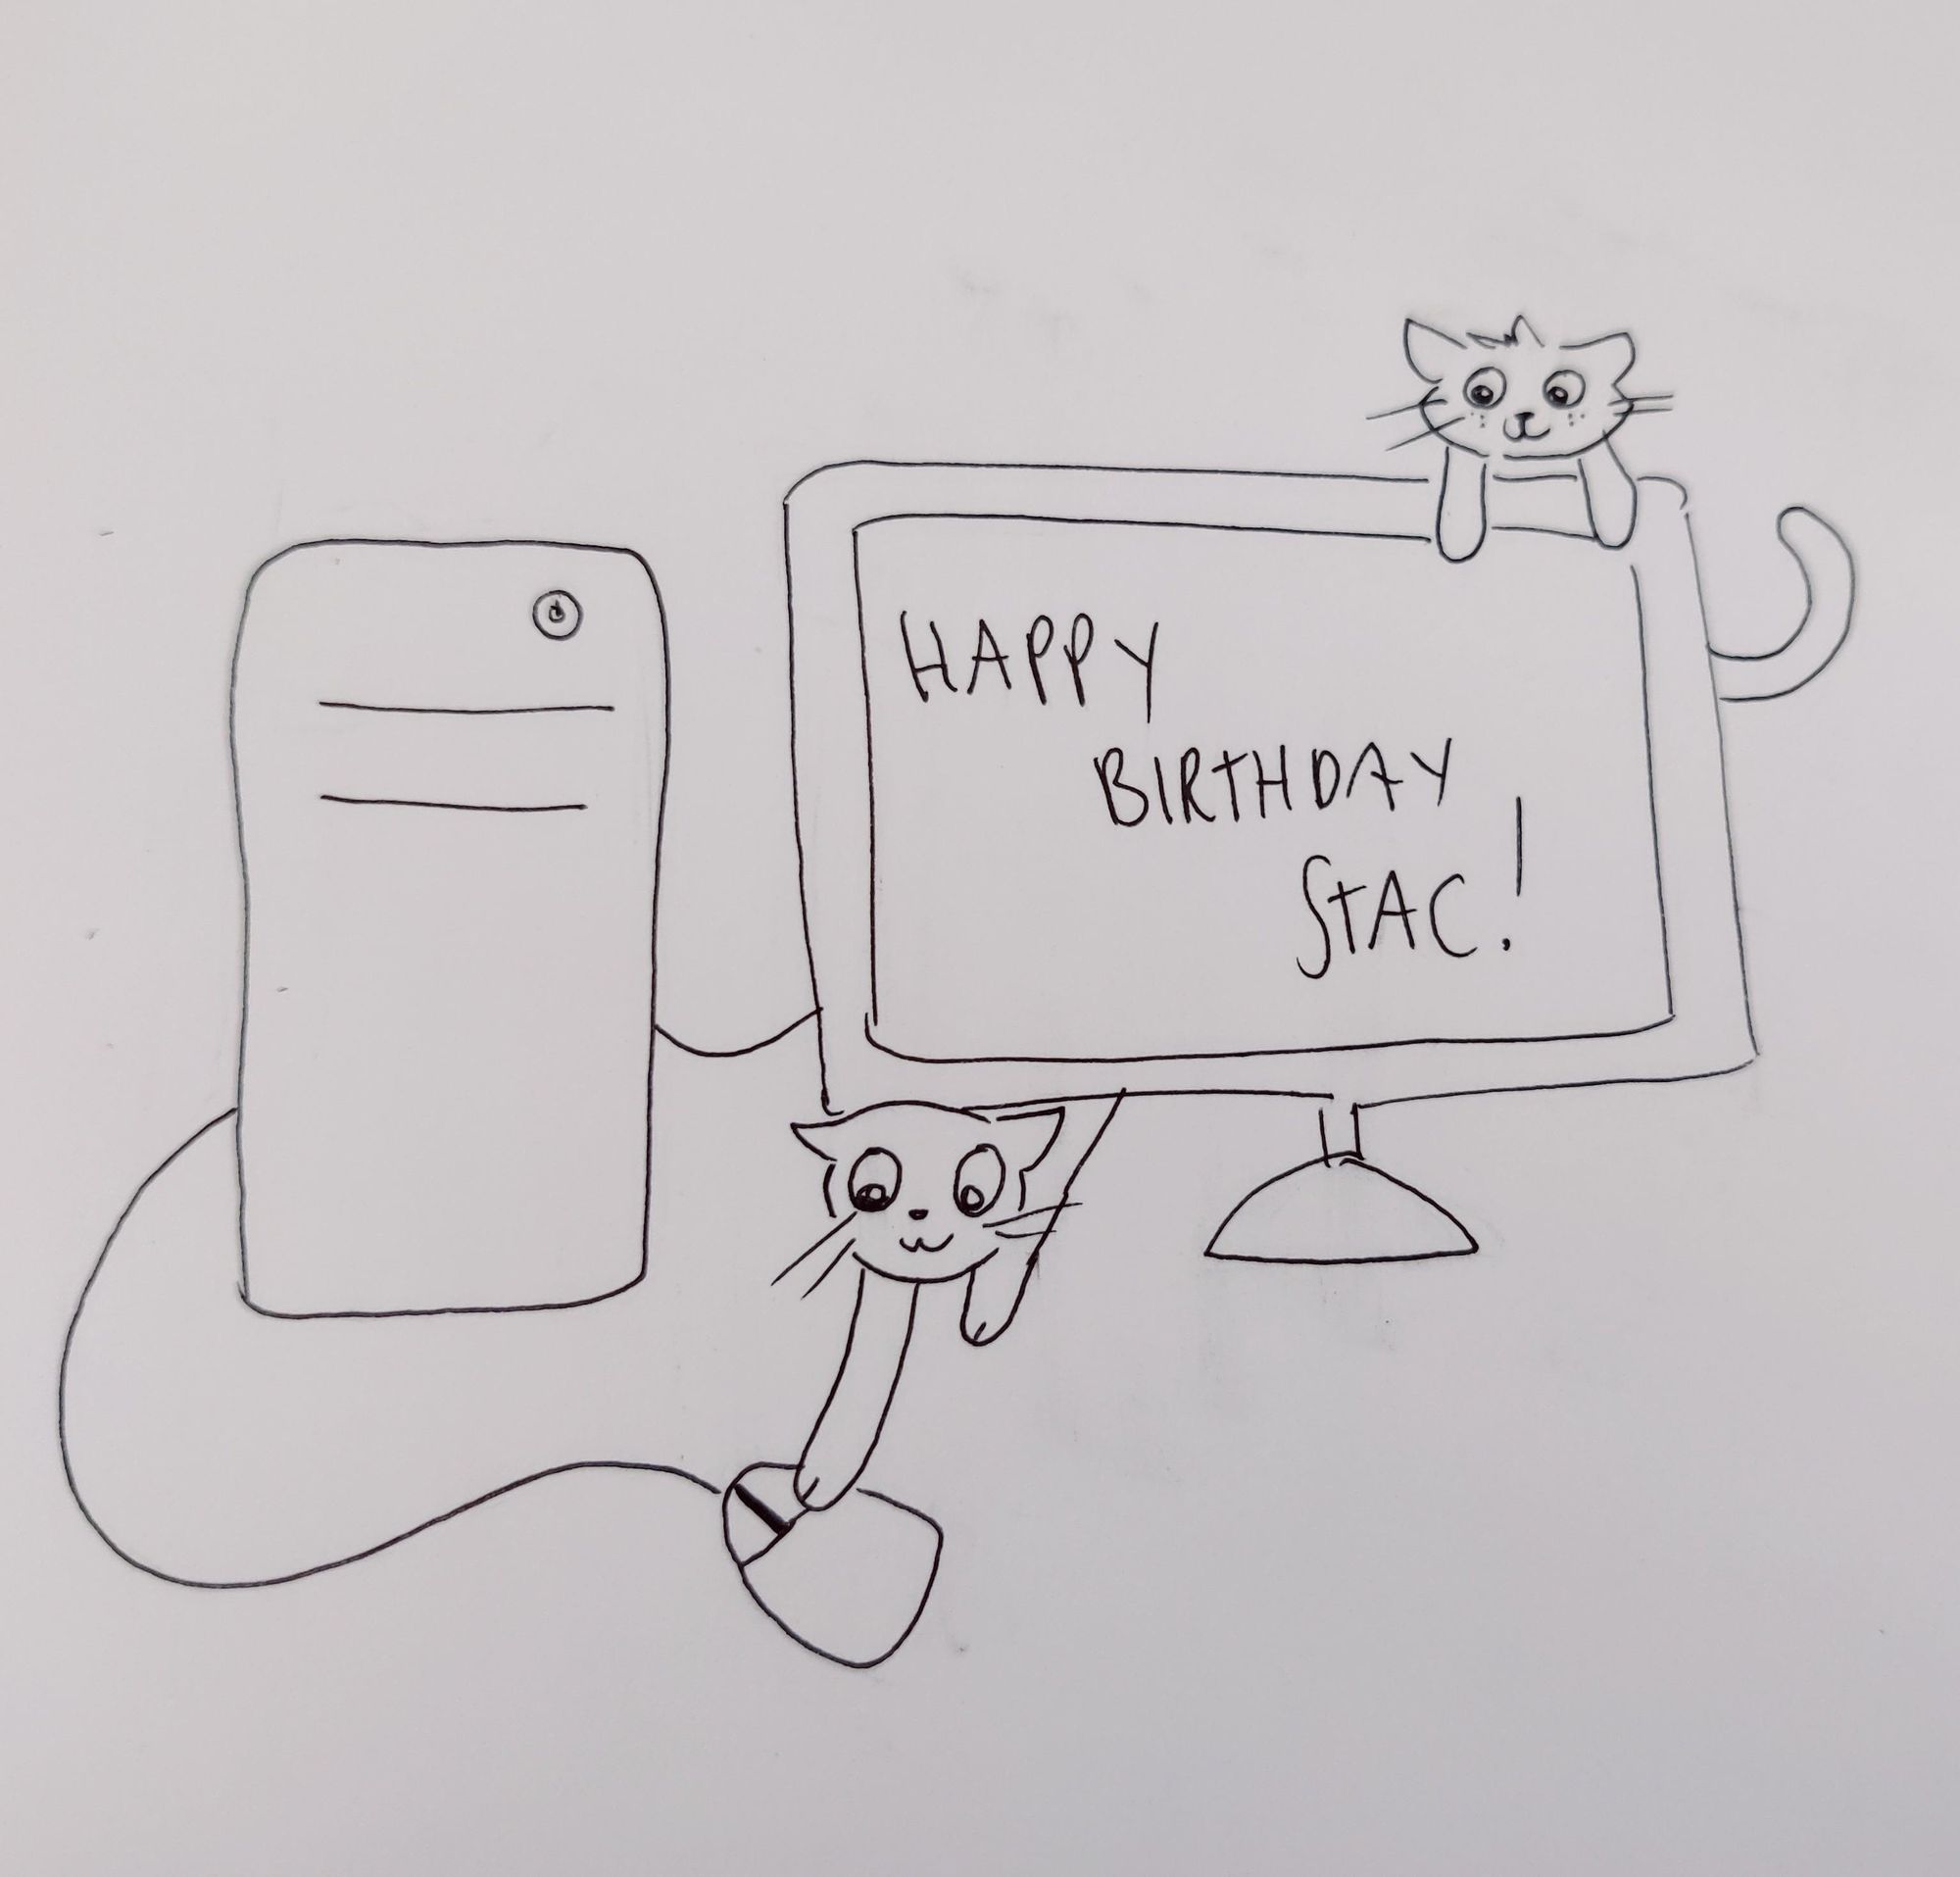 A line sketch of a computer with a monitor that reads "HAPPY BIRHTDAY STAC!". There are two cats popping out from behind the computer, one hanging over the screen and one batting the mouse.